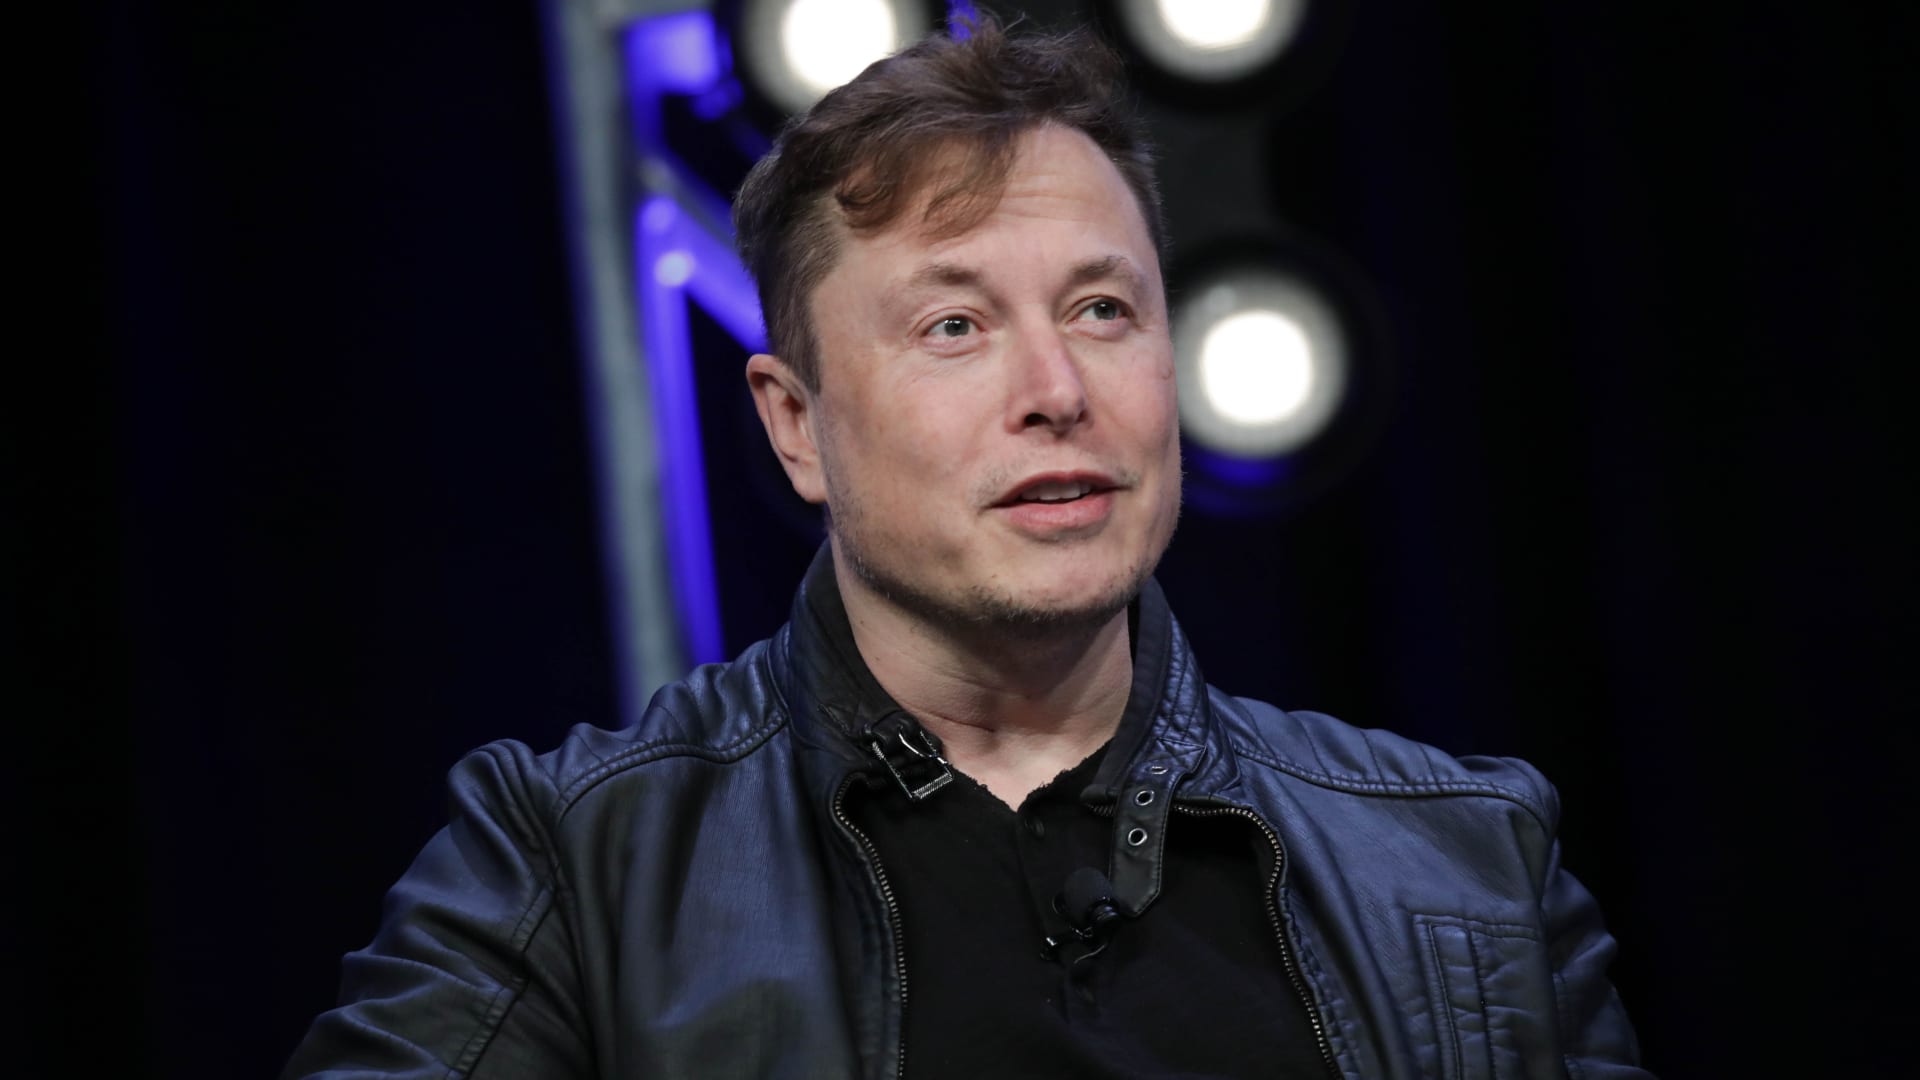 Elon Musk sold nearly $7 billion worth of Tesla stock—here’s how much money you’d have if you’d invested $1,000 in the company 10 years ago